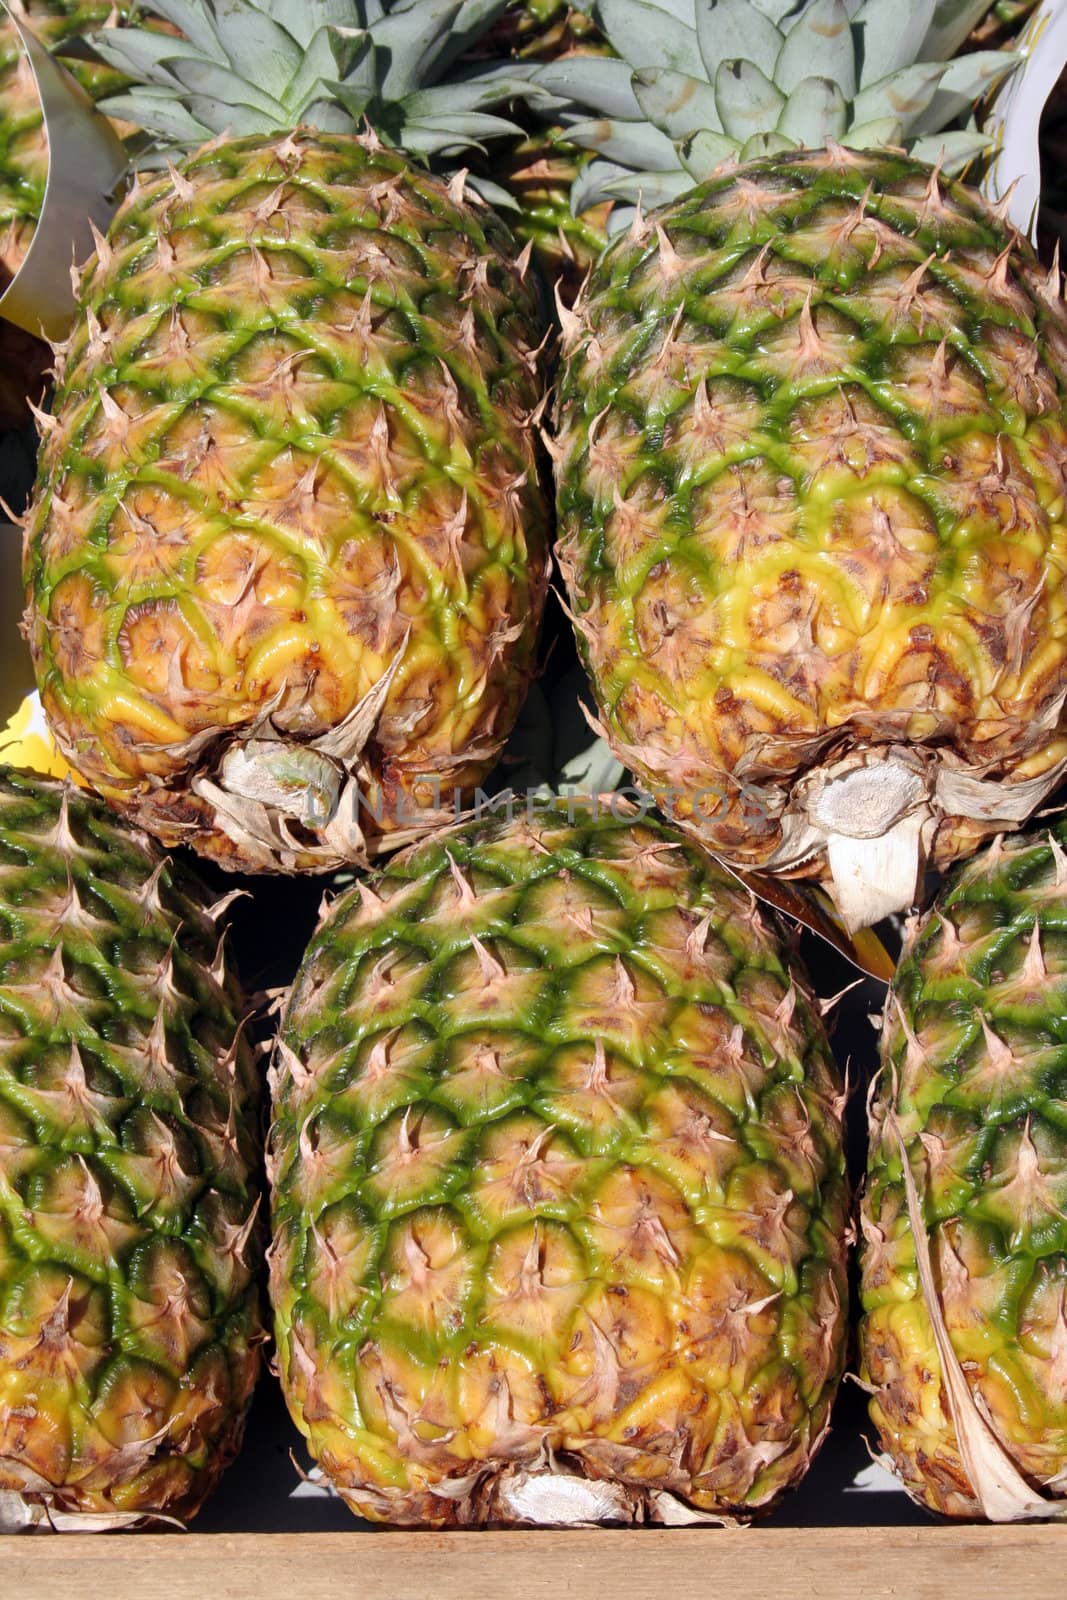 Pineapples displayed at the sunny outside of a grocery store.